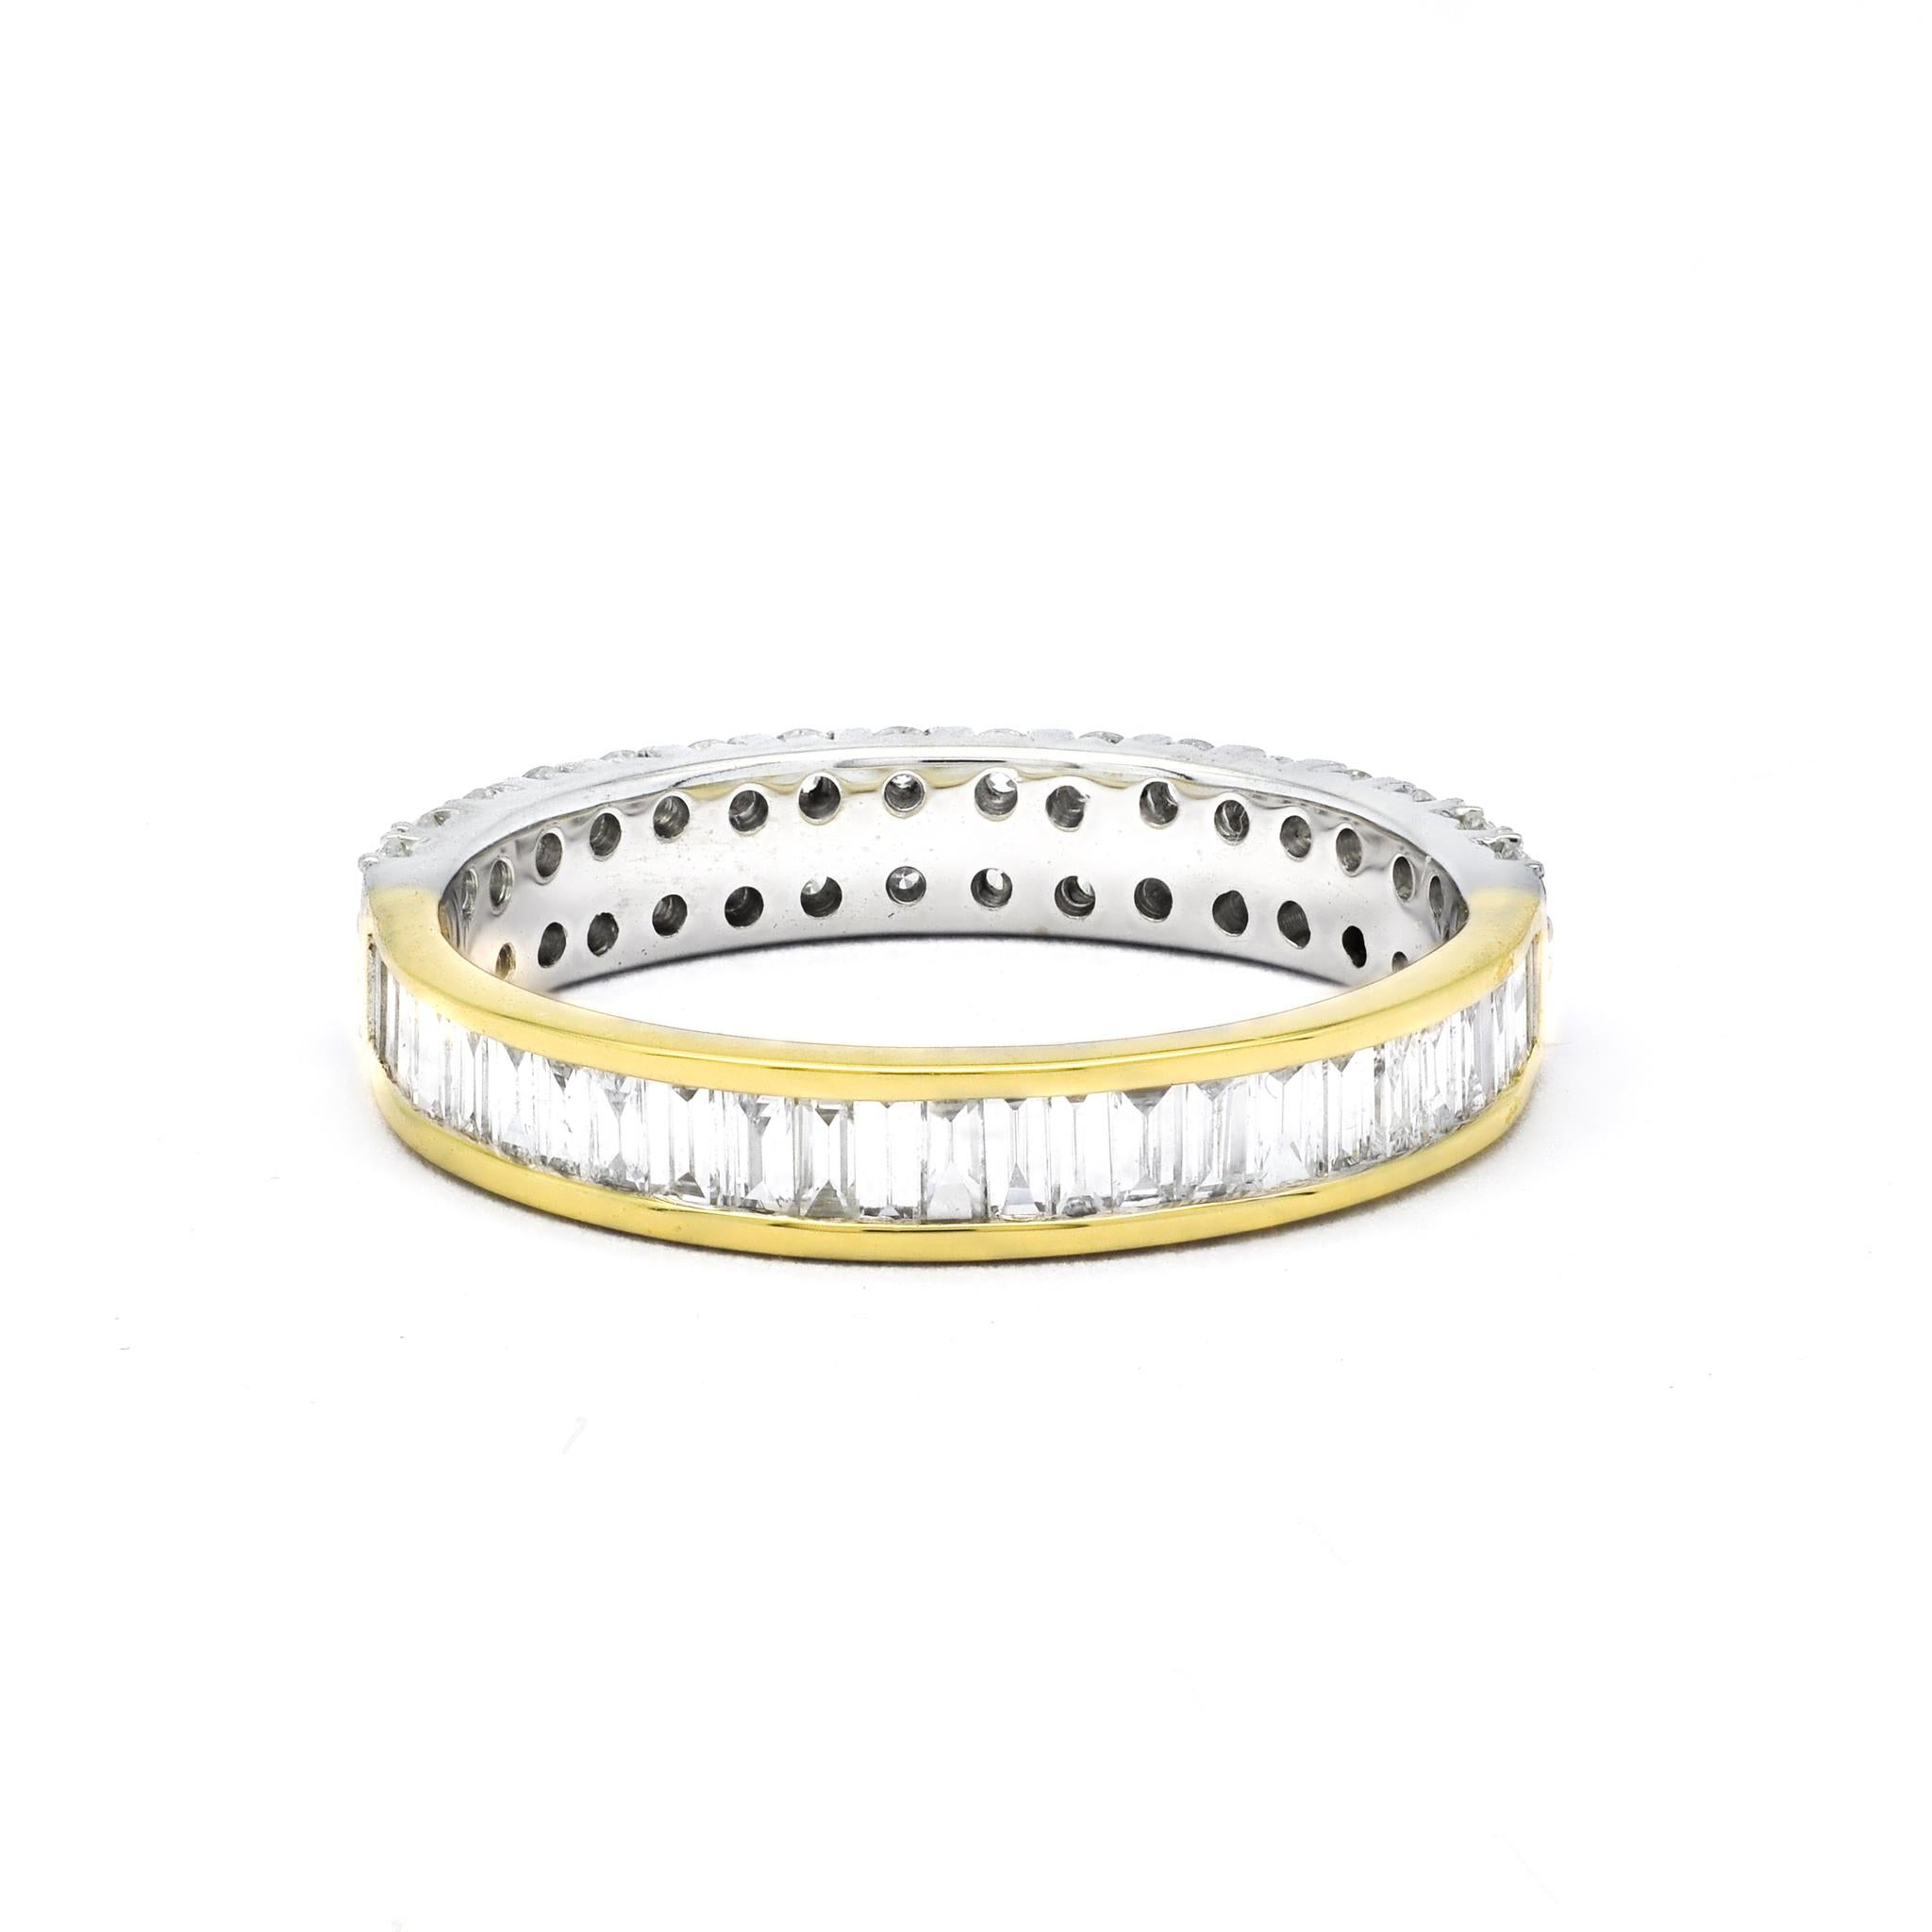 Introducing our exquisite Dual-Style Diamond Band, a radiant fusion of elegance and versatility. Crafted in 18 Karat White and Yellow Gold, this designer wedding band exudes sophistication and charm, destined to elevate your special